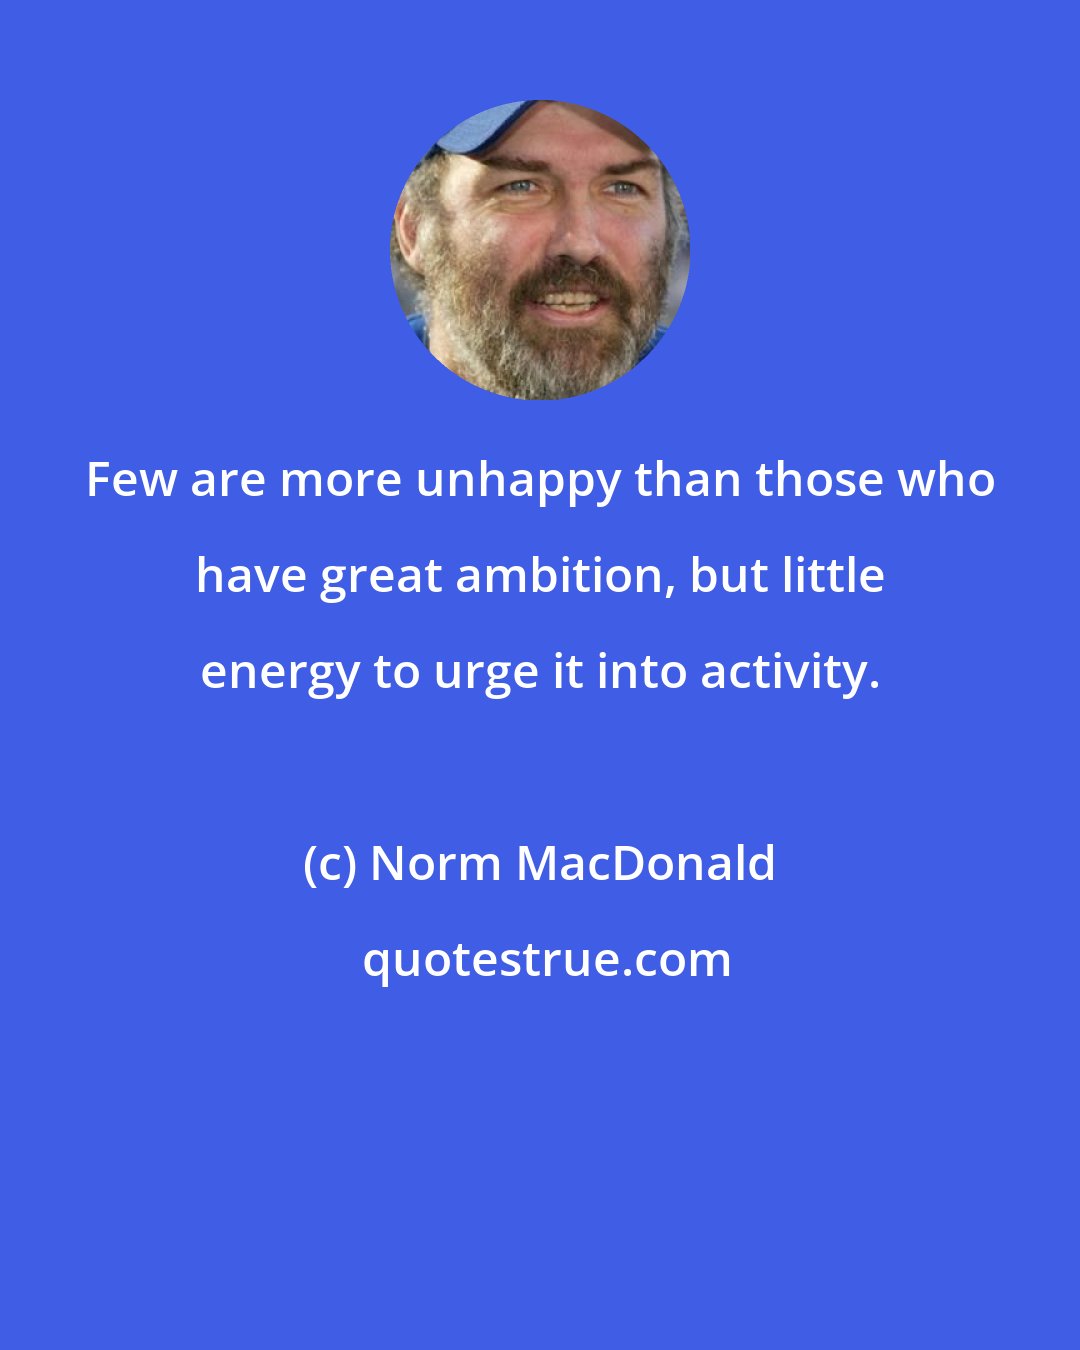 Norm MacDonald: Few are more unhappy than those who have great ambition, but little energy to urge it into activity.